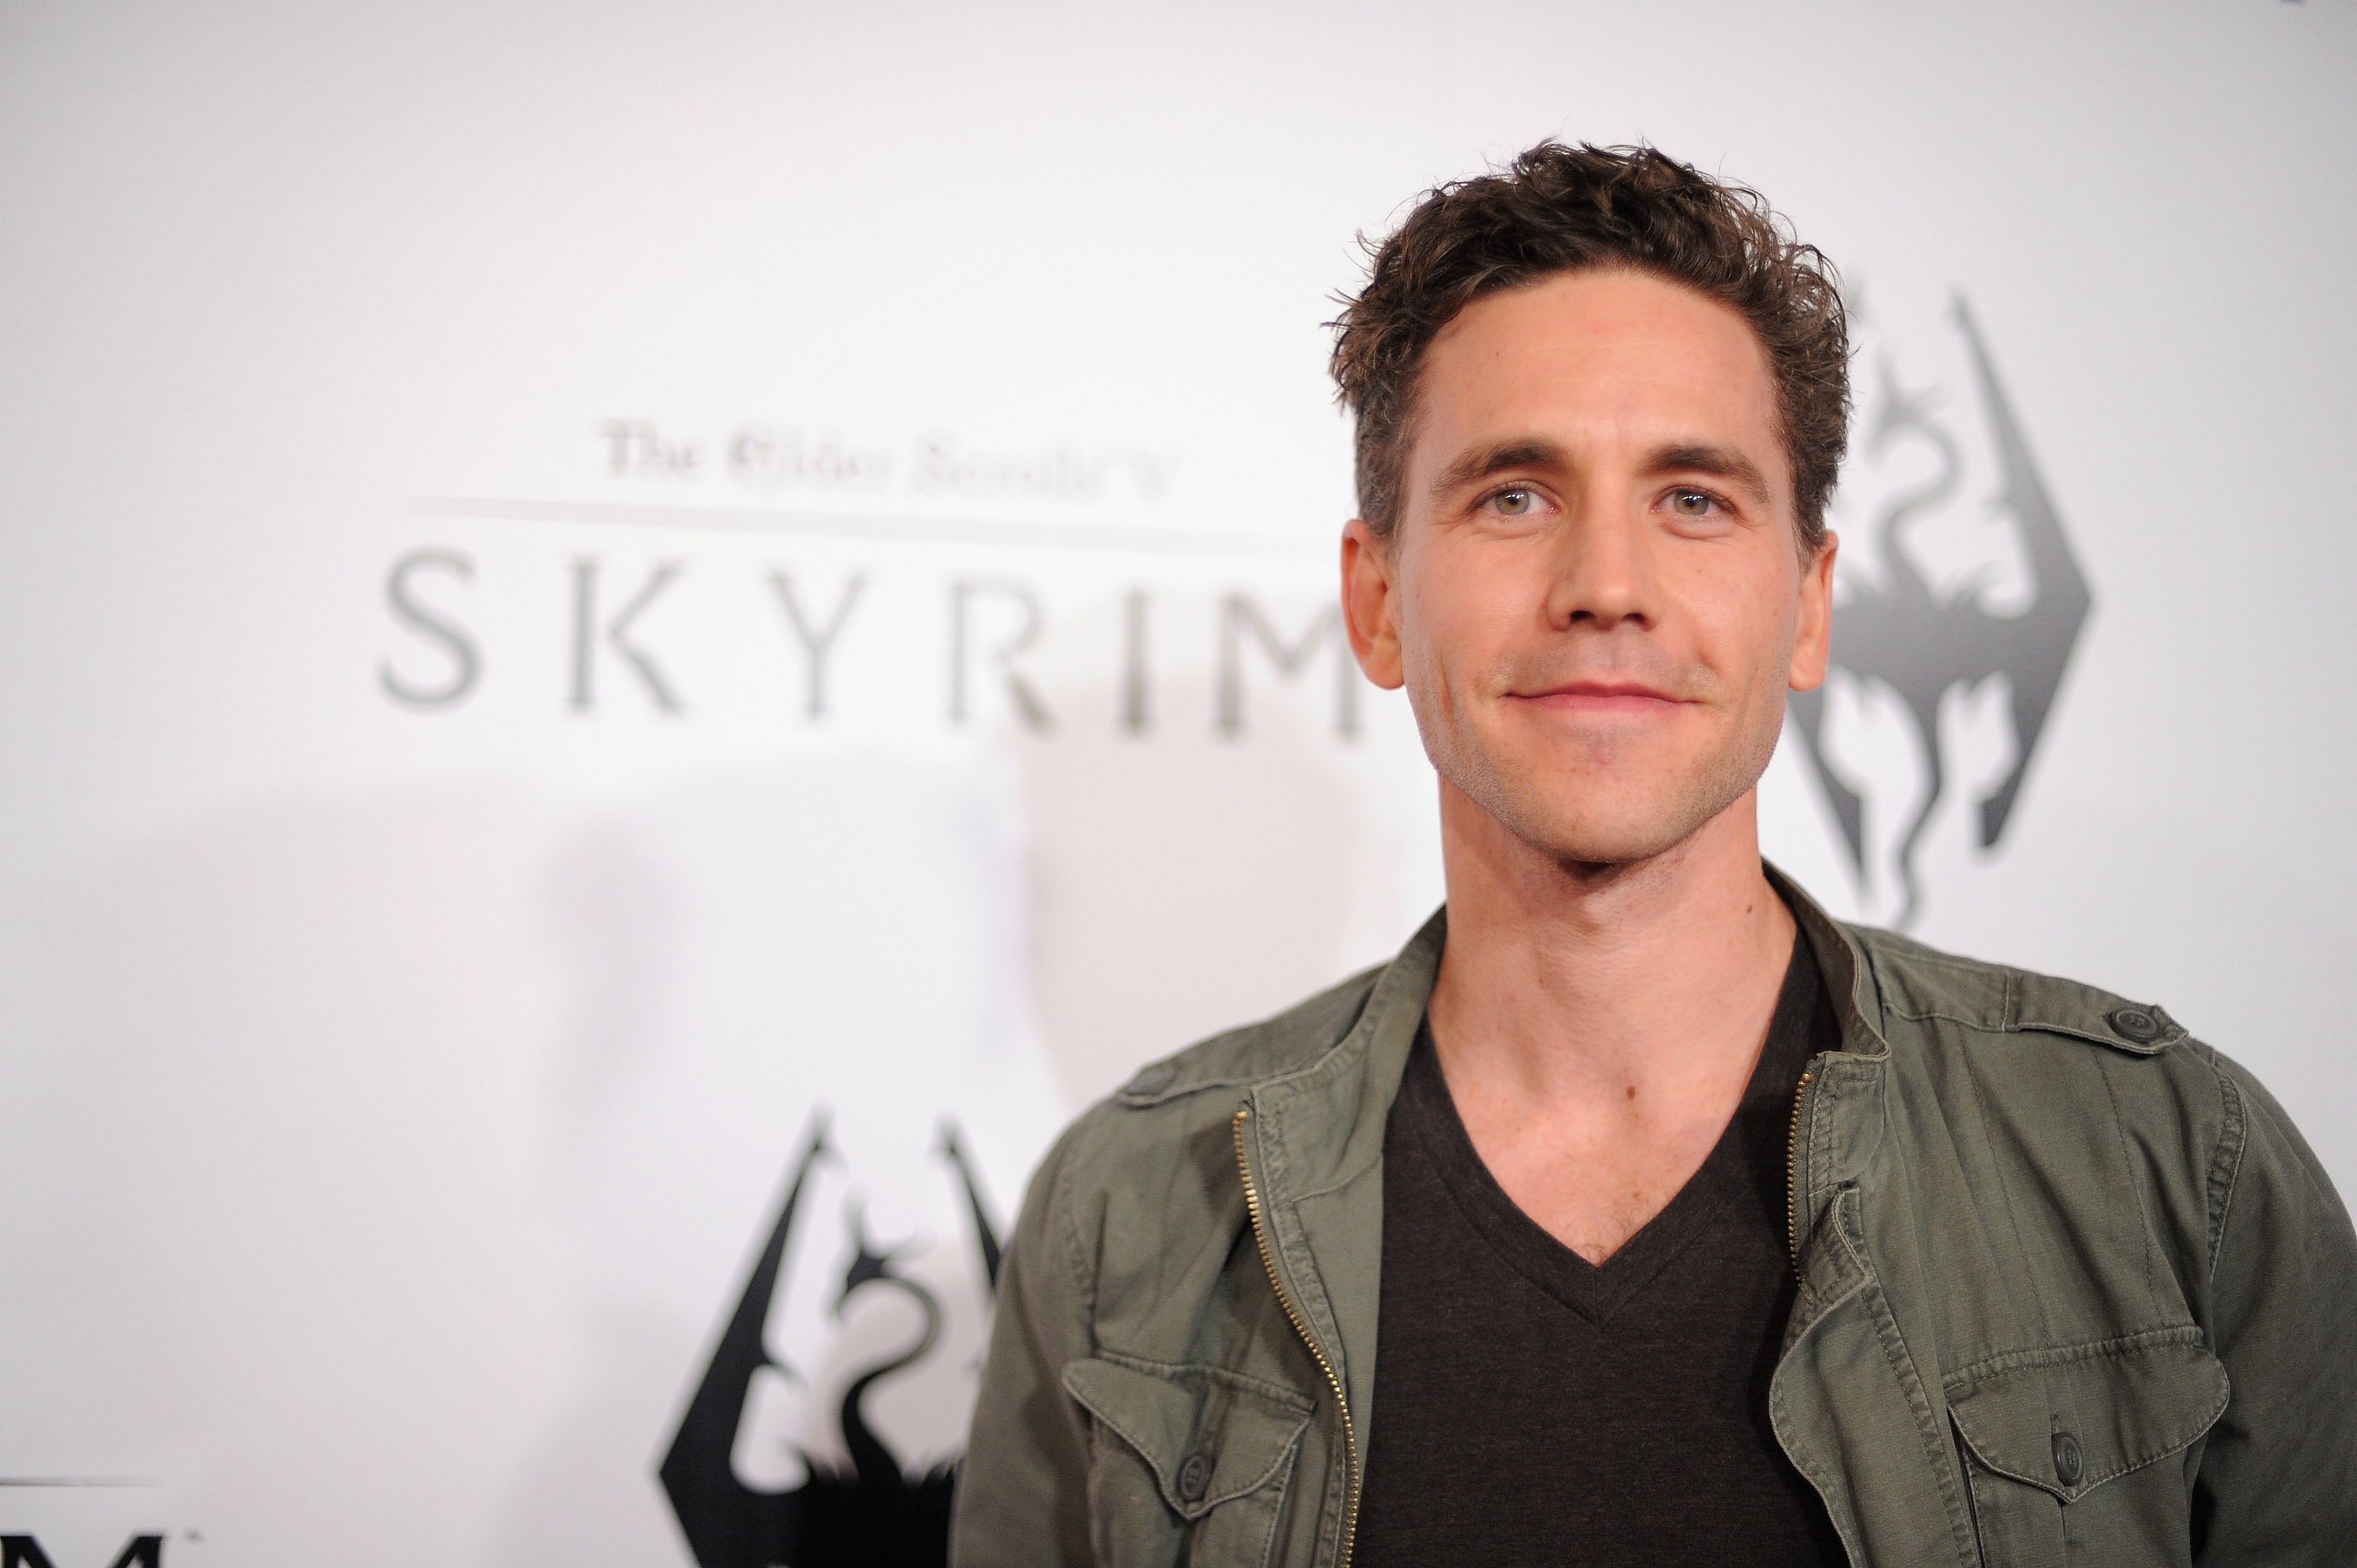 Brian Dietzen attending the official launch party for The Elder Scrolls V: Skyrim. Source | Photo: Getty Images